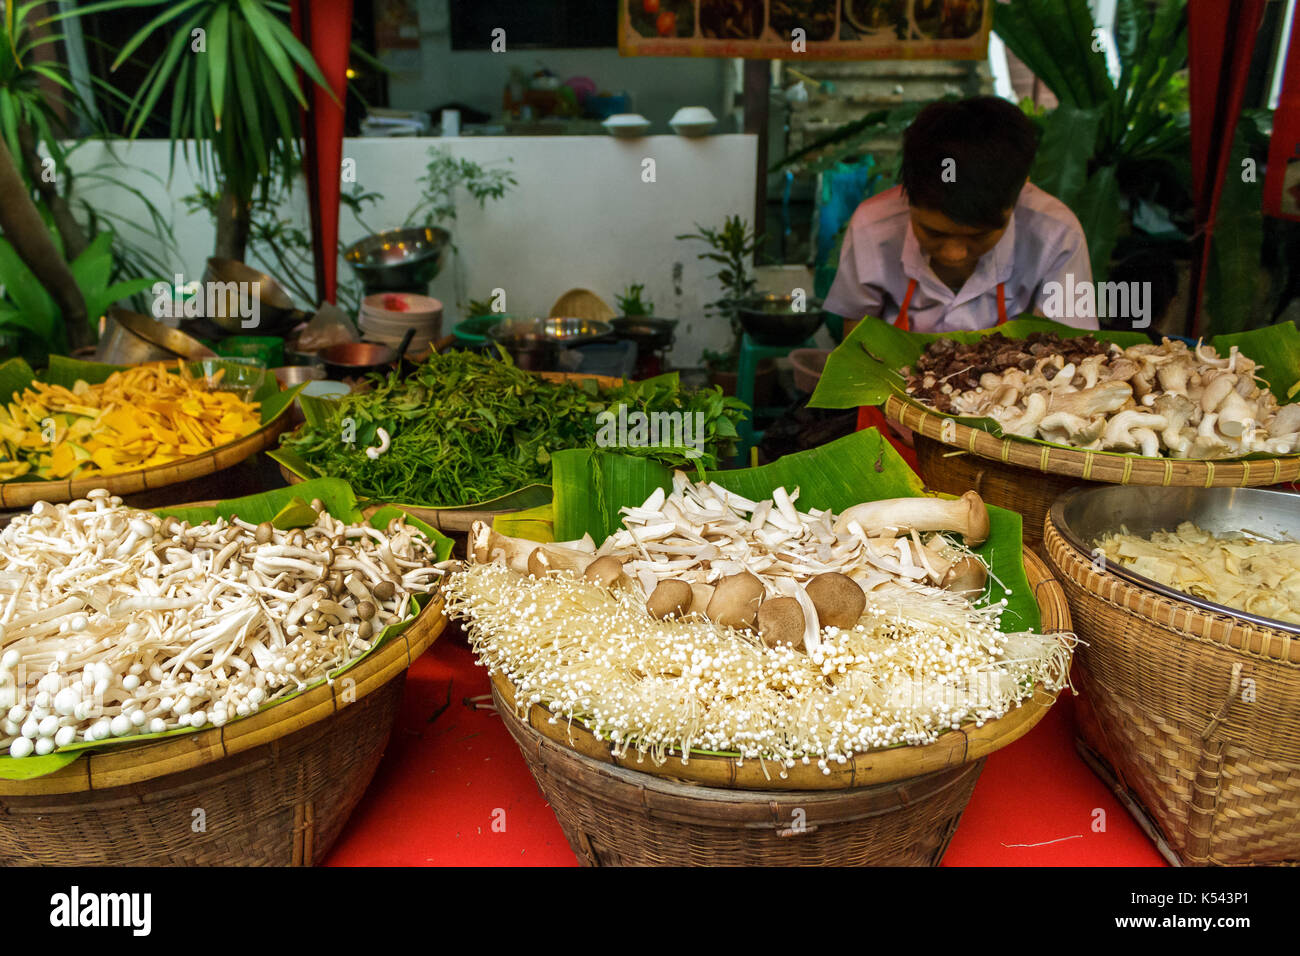 CHIANG MAI, THAILAND - 6/13/2015: A cook prepares vegetables for food at the Sunday walking street market. Stock Photo